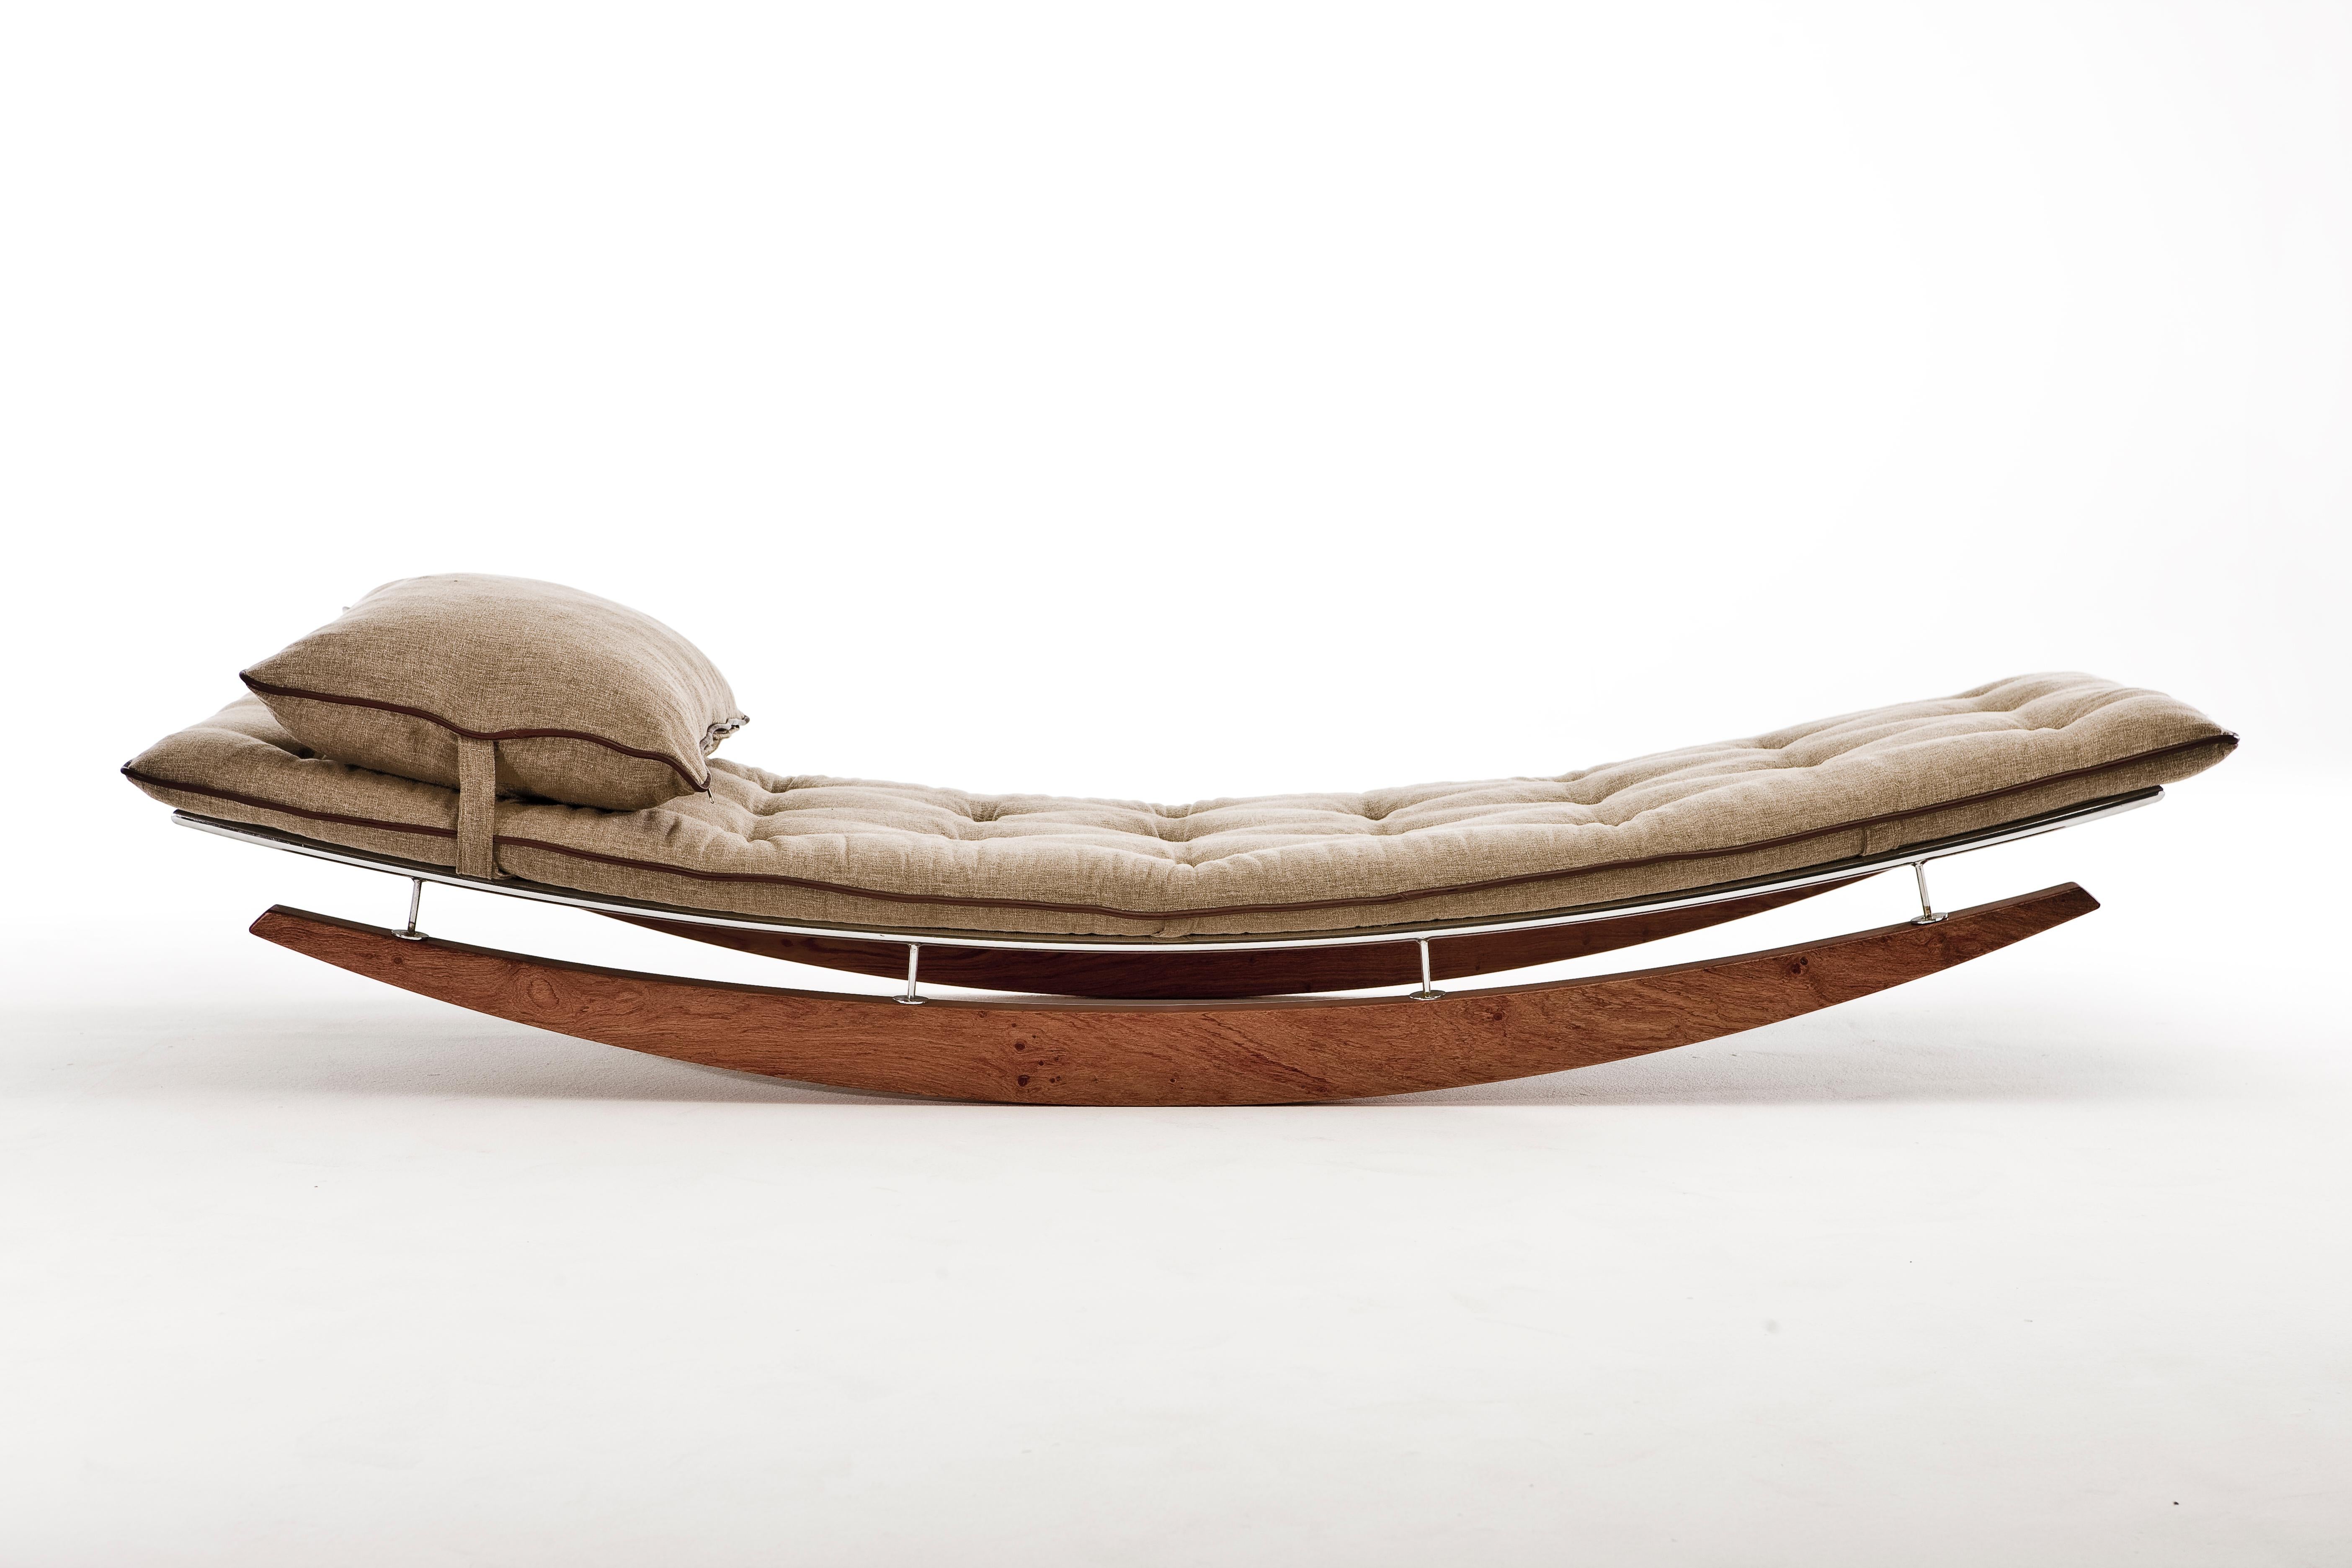 Sungodess Daybed by Egg Designs
Dimensions: 198 L X 69 D X 45 H cm
Materials: Wire Mesh, African Mahogany, Linen & Leather Upholstery

Founded by South Africans and life partners, Greg and Roche Dry - Egg is a unique perspective in contemporary